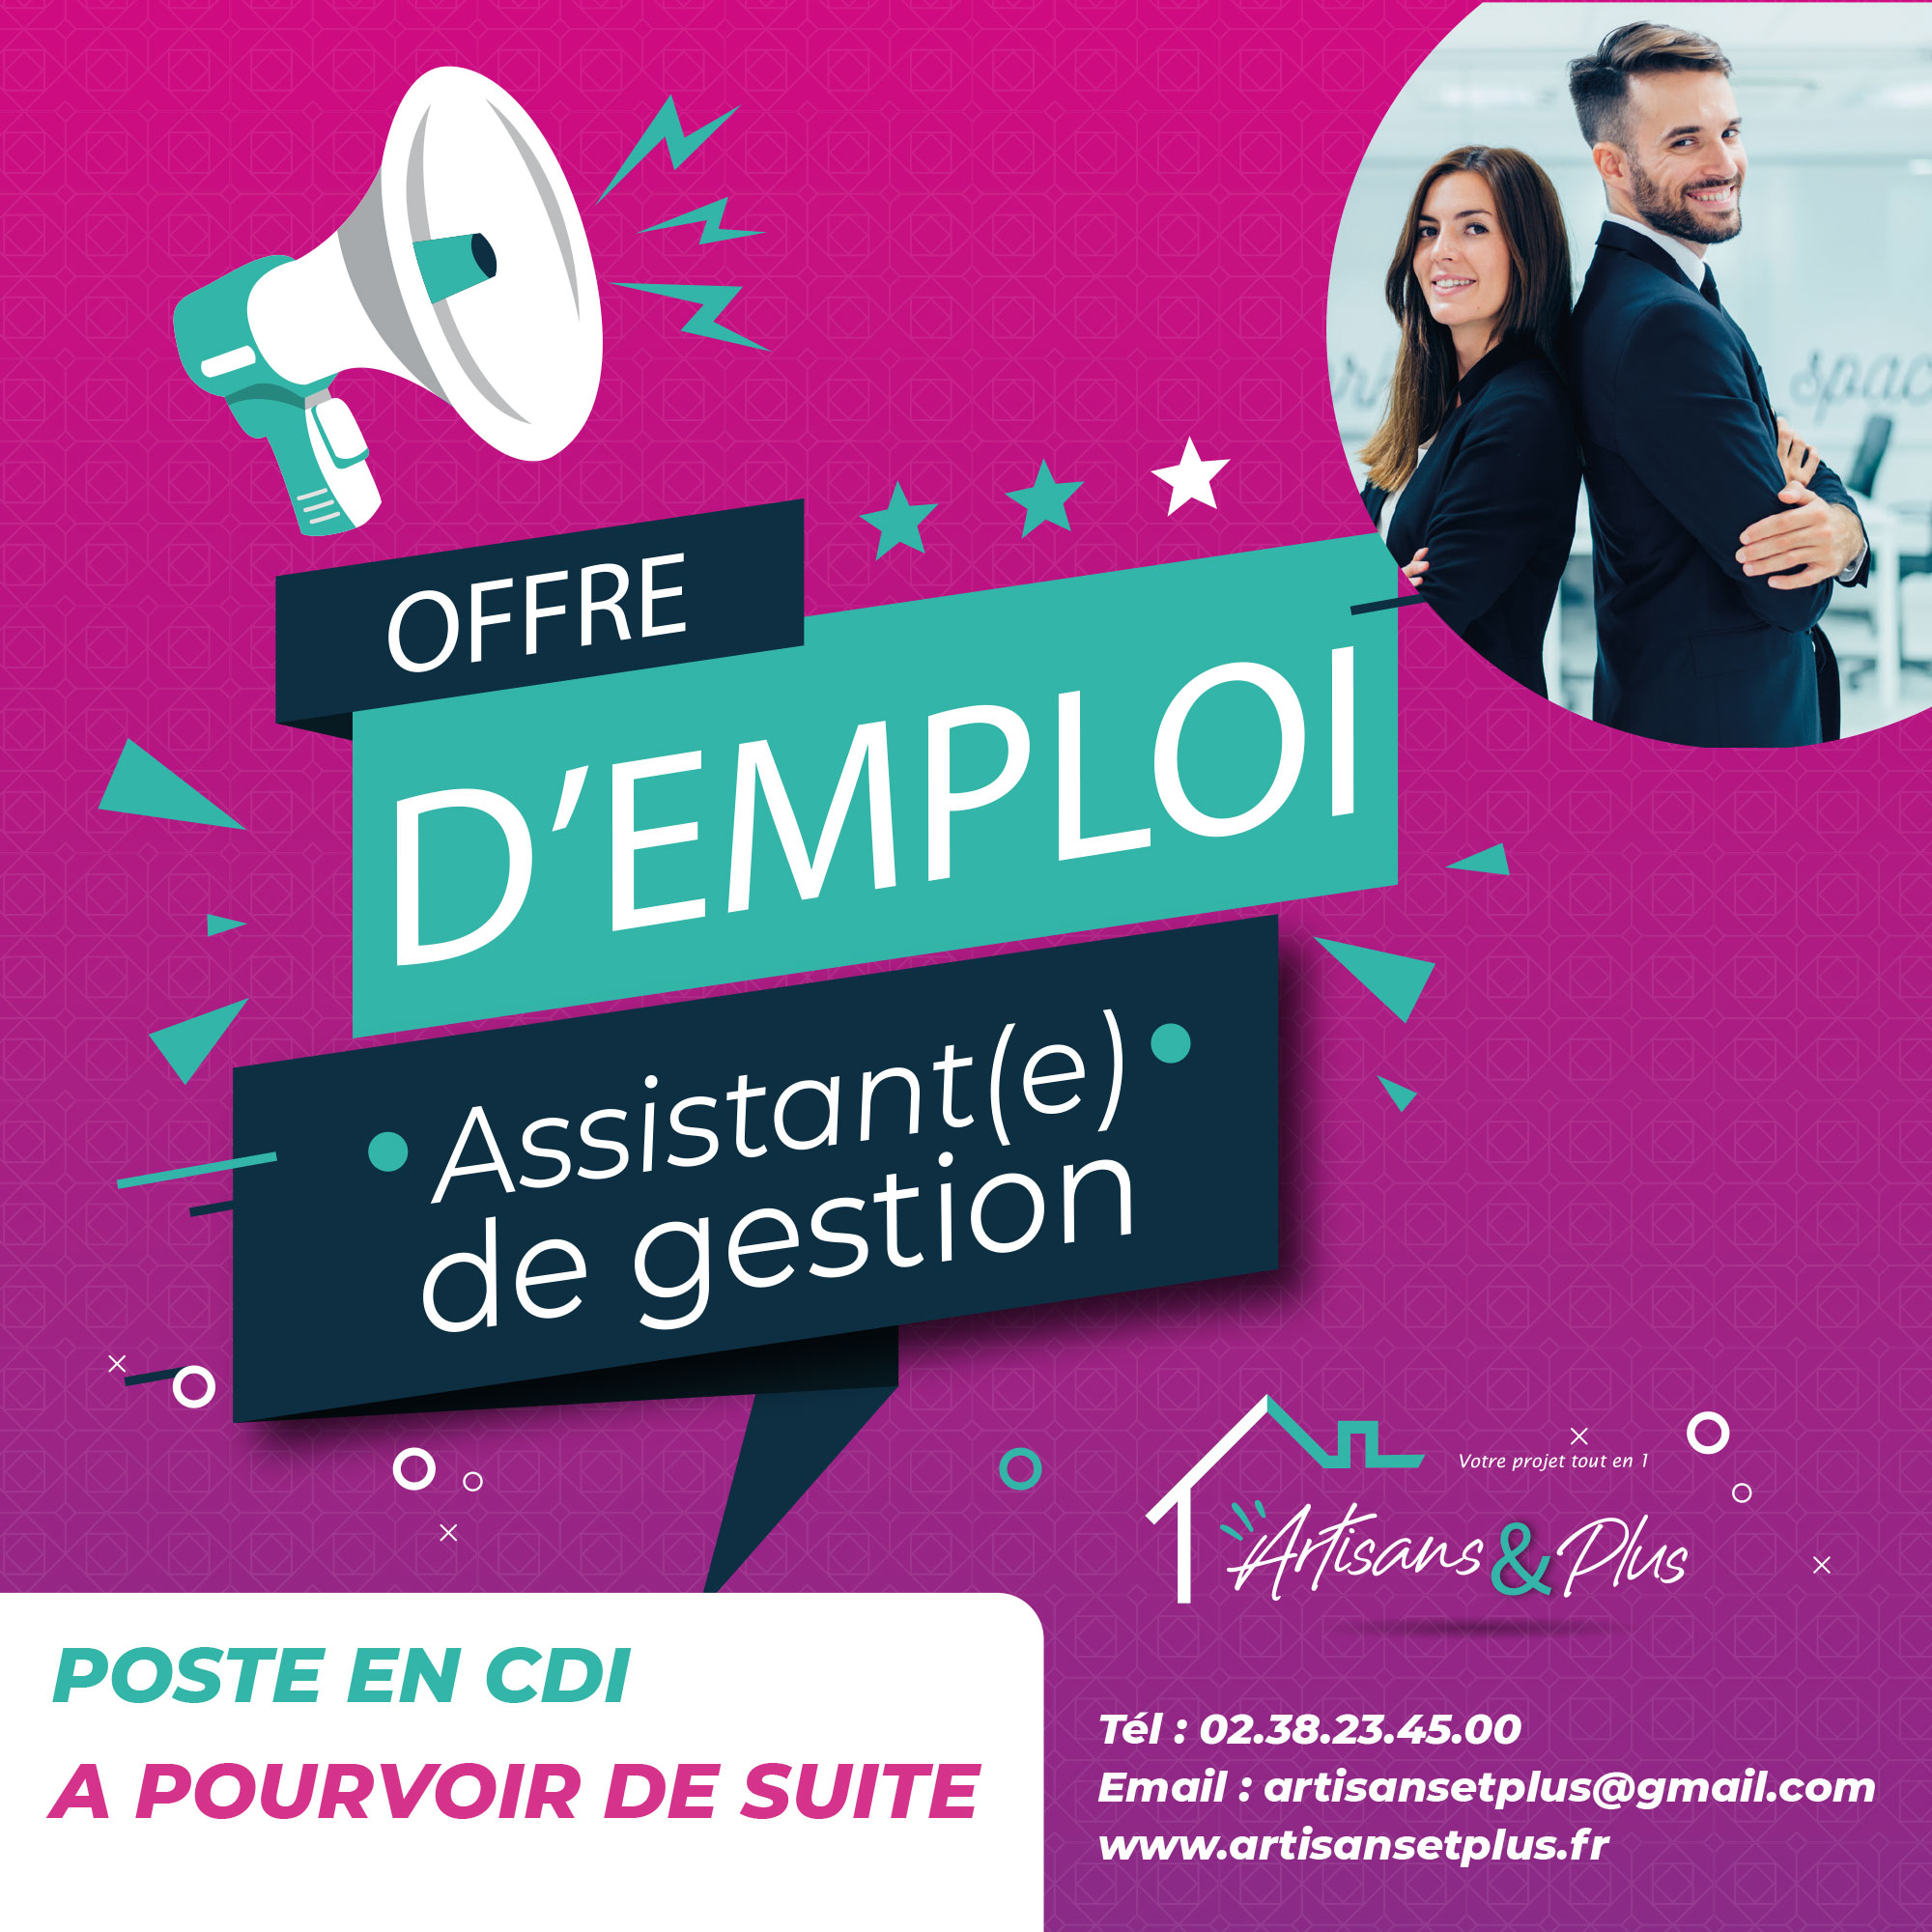 offre-emploi-04AVRIL-OFFRE-ASSISTANT-GESTION